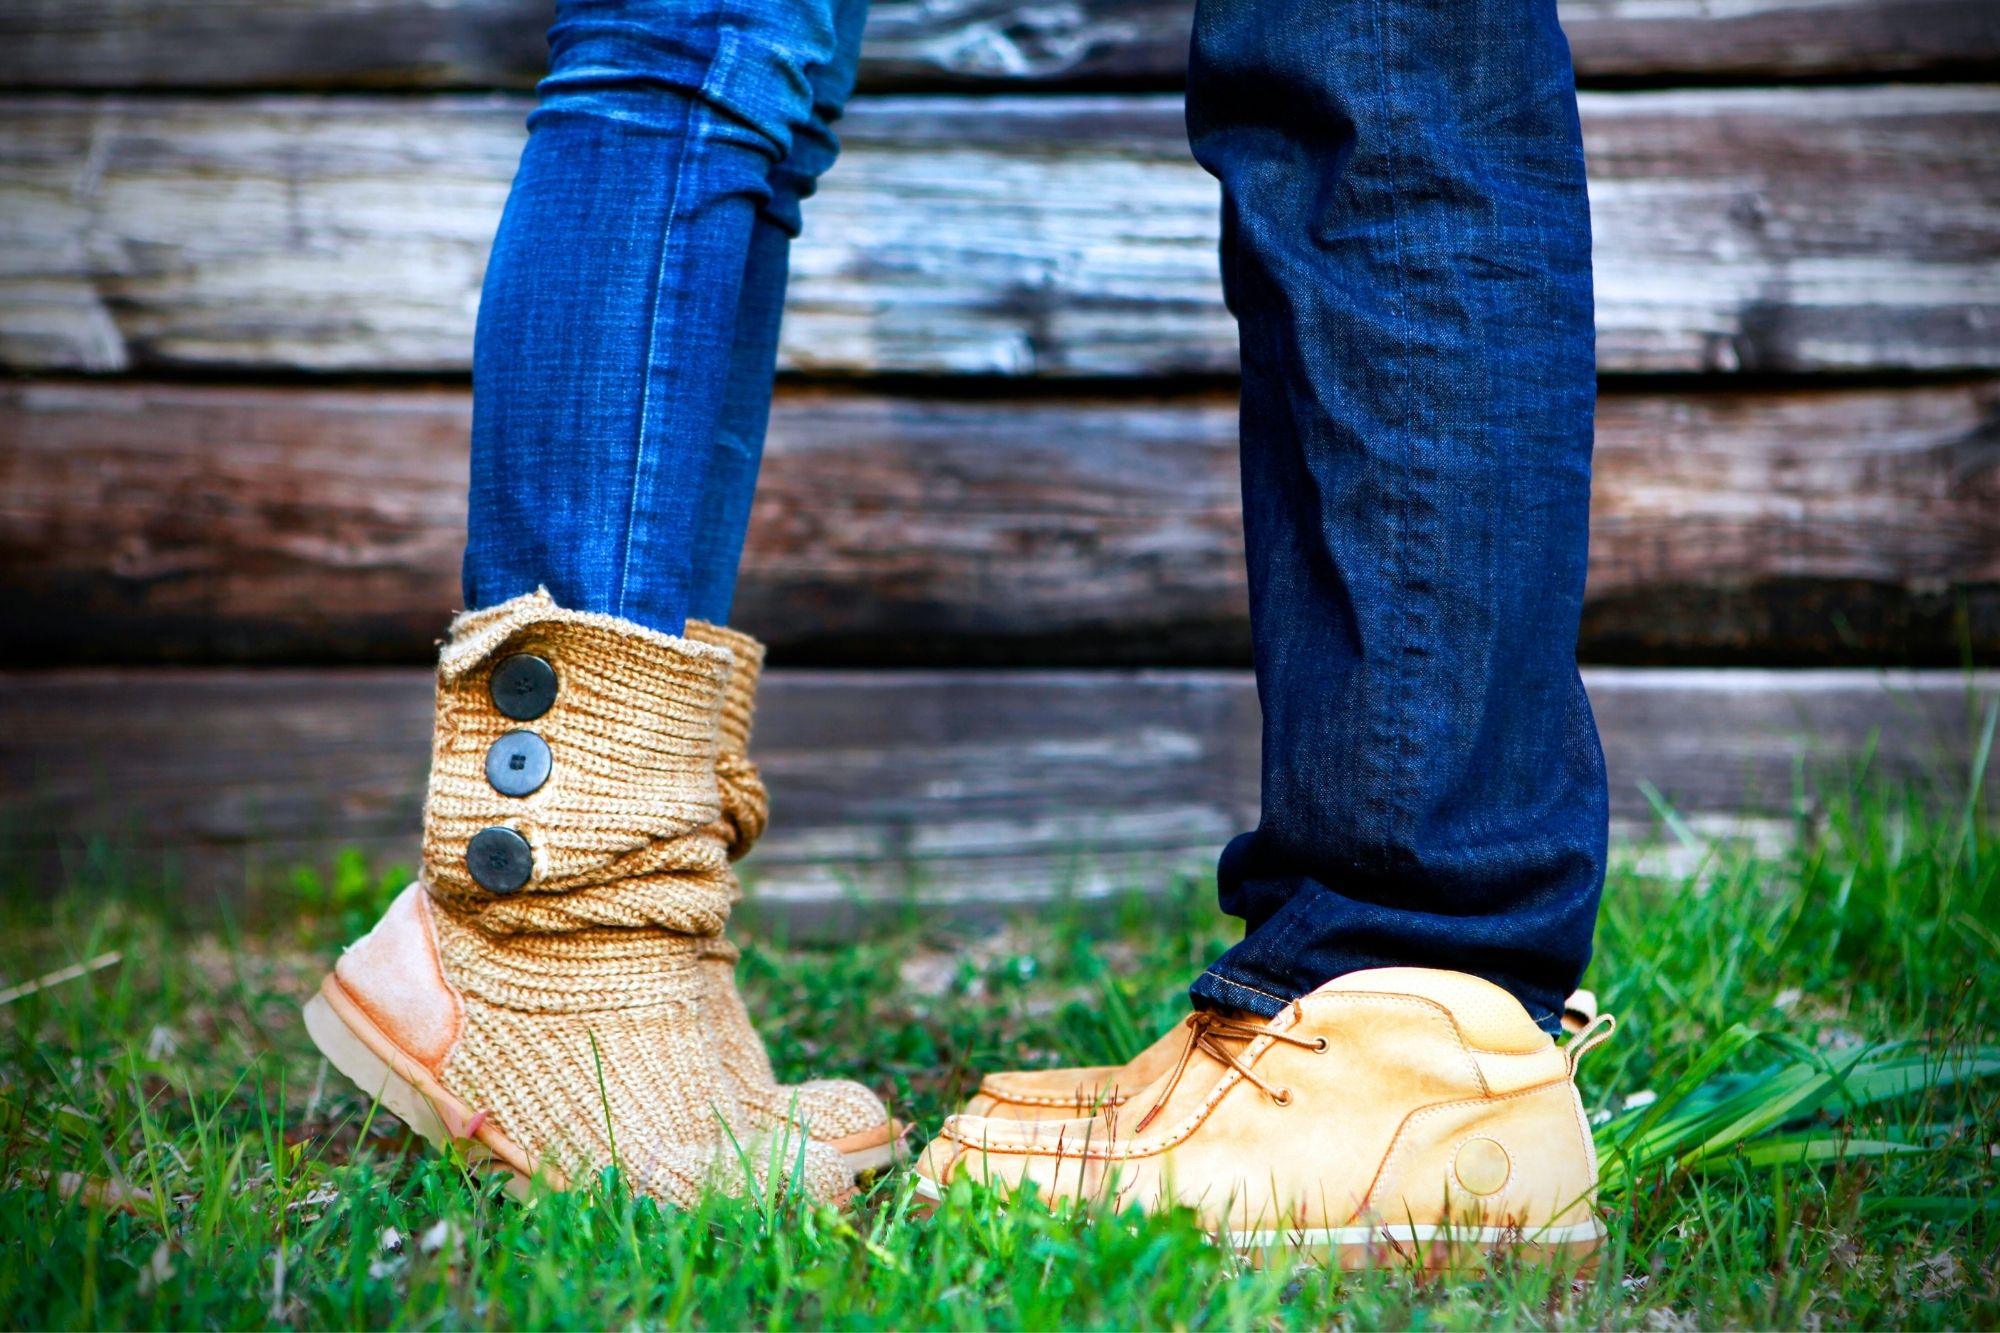 Close up of the legs and shoes of a man and woman facing each other closely as they discuss the 2 common mistakes that will give you an unhappy marriage. She is wearing short boots and is standing on her toes, he is wearing tan loafers.